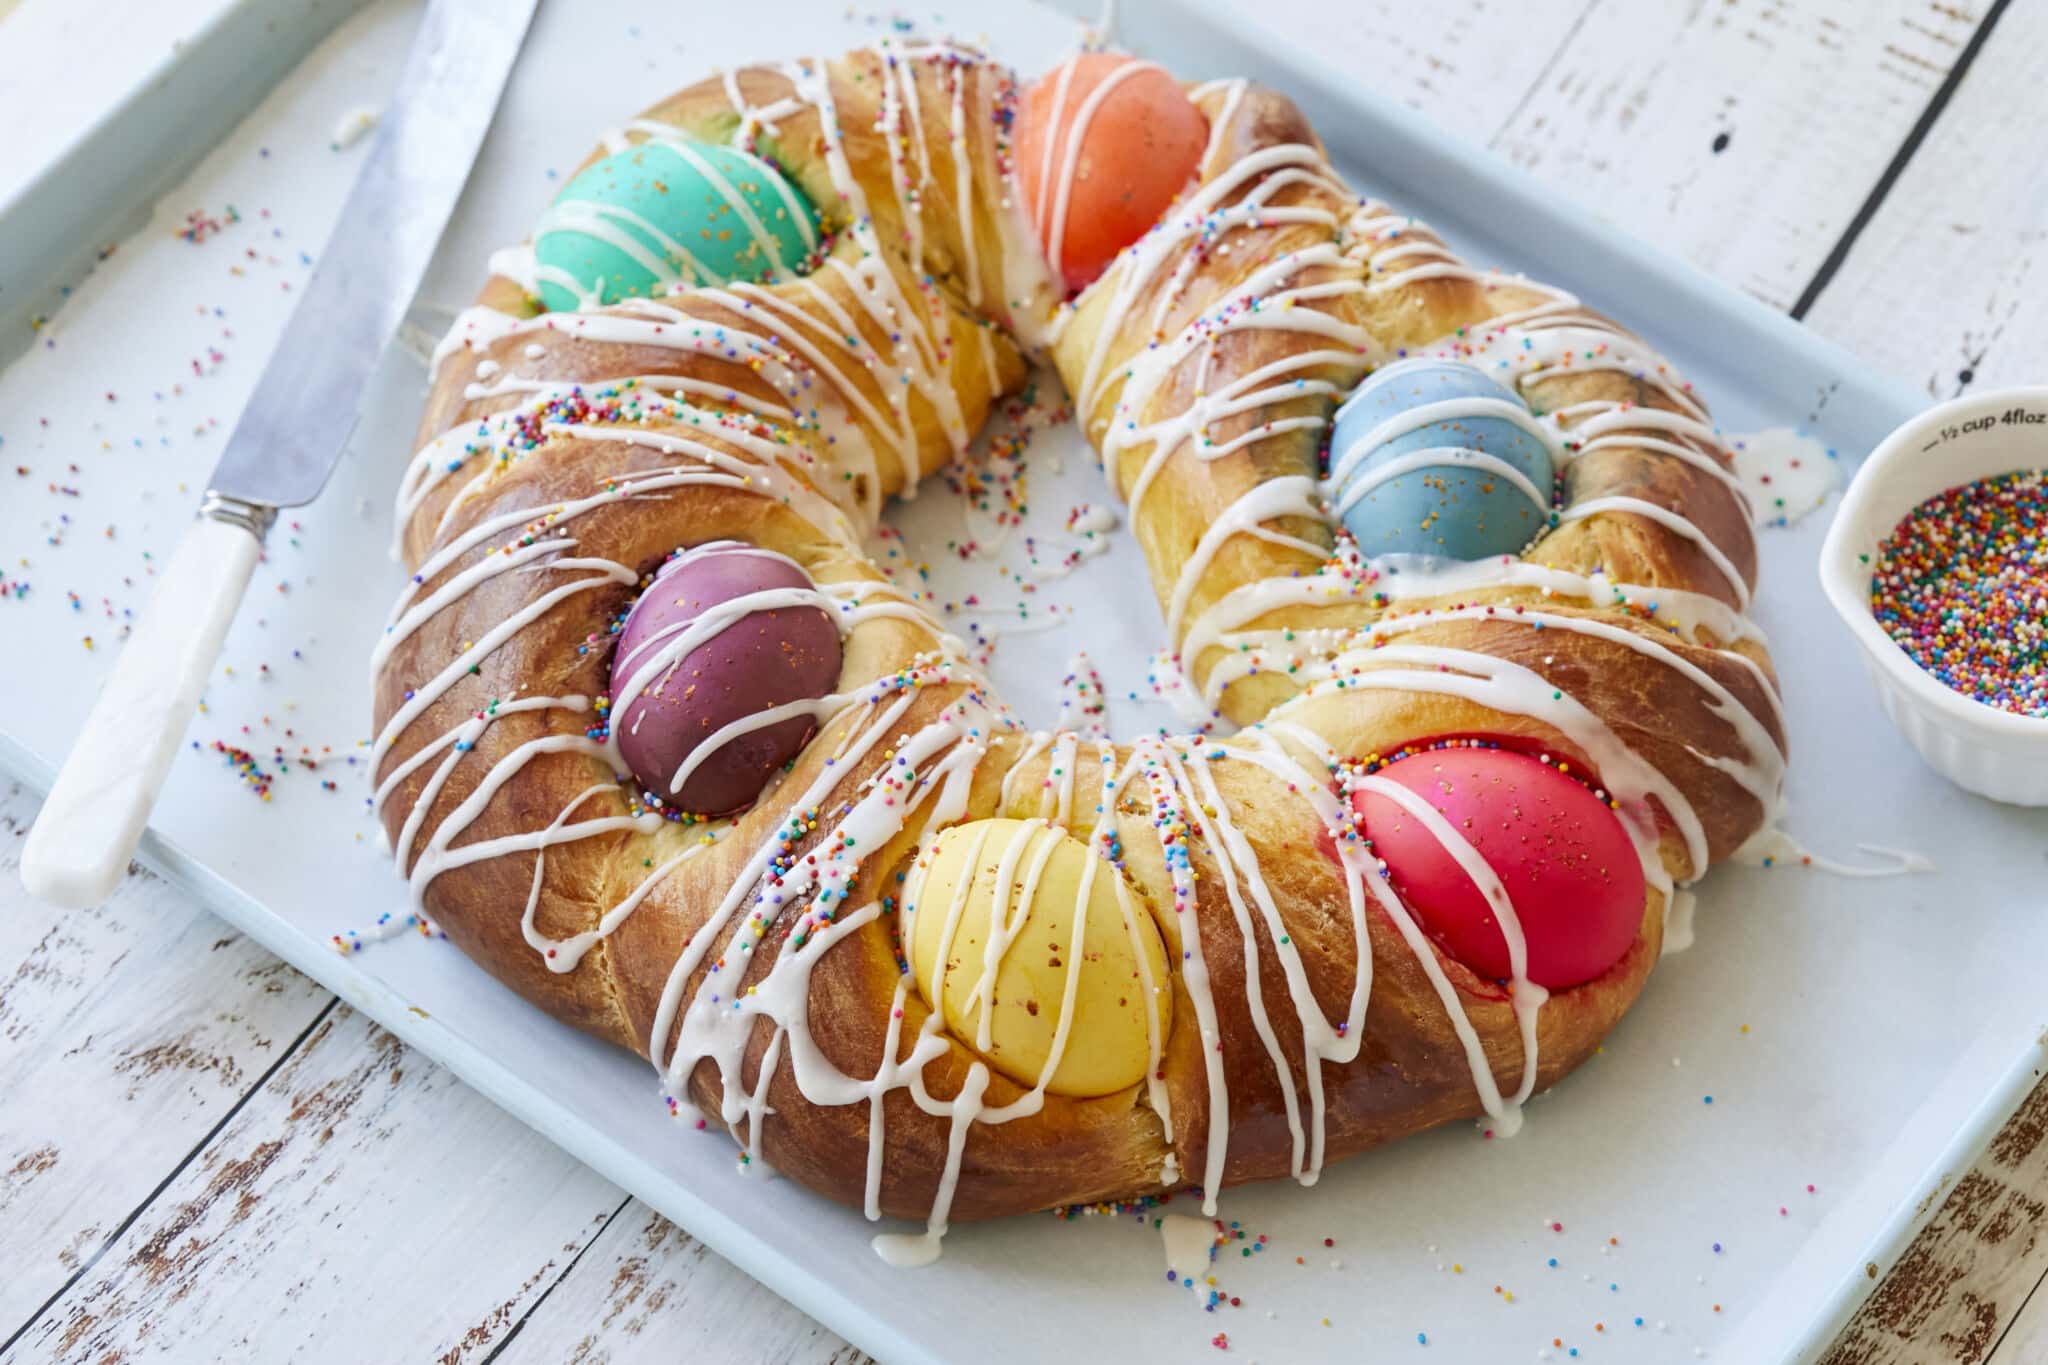 Traditional Italian Easter Bread (Pane di Pasqua) is golden, light and fluffy, and decorated with colorful Easter eggs, drizzled with icing and topped with colorful sprinkles.